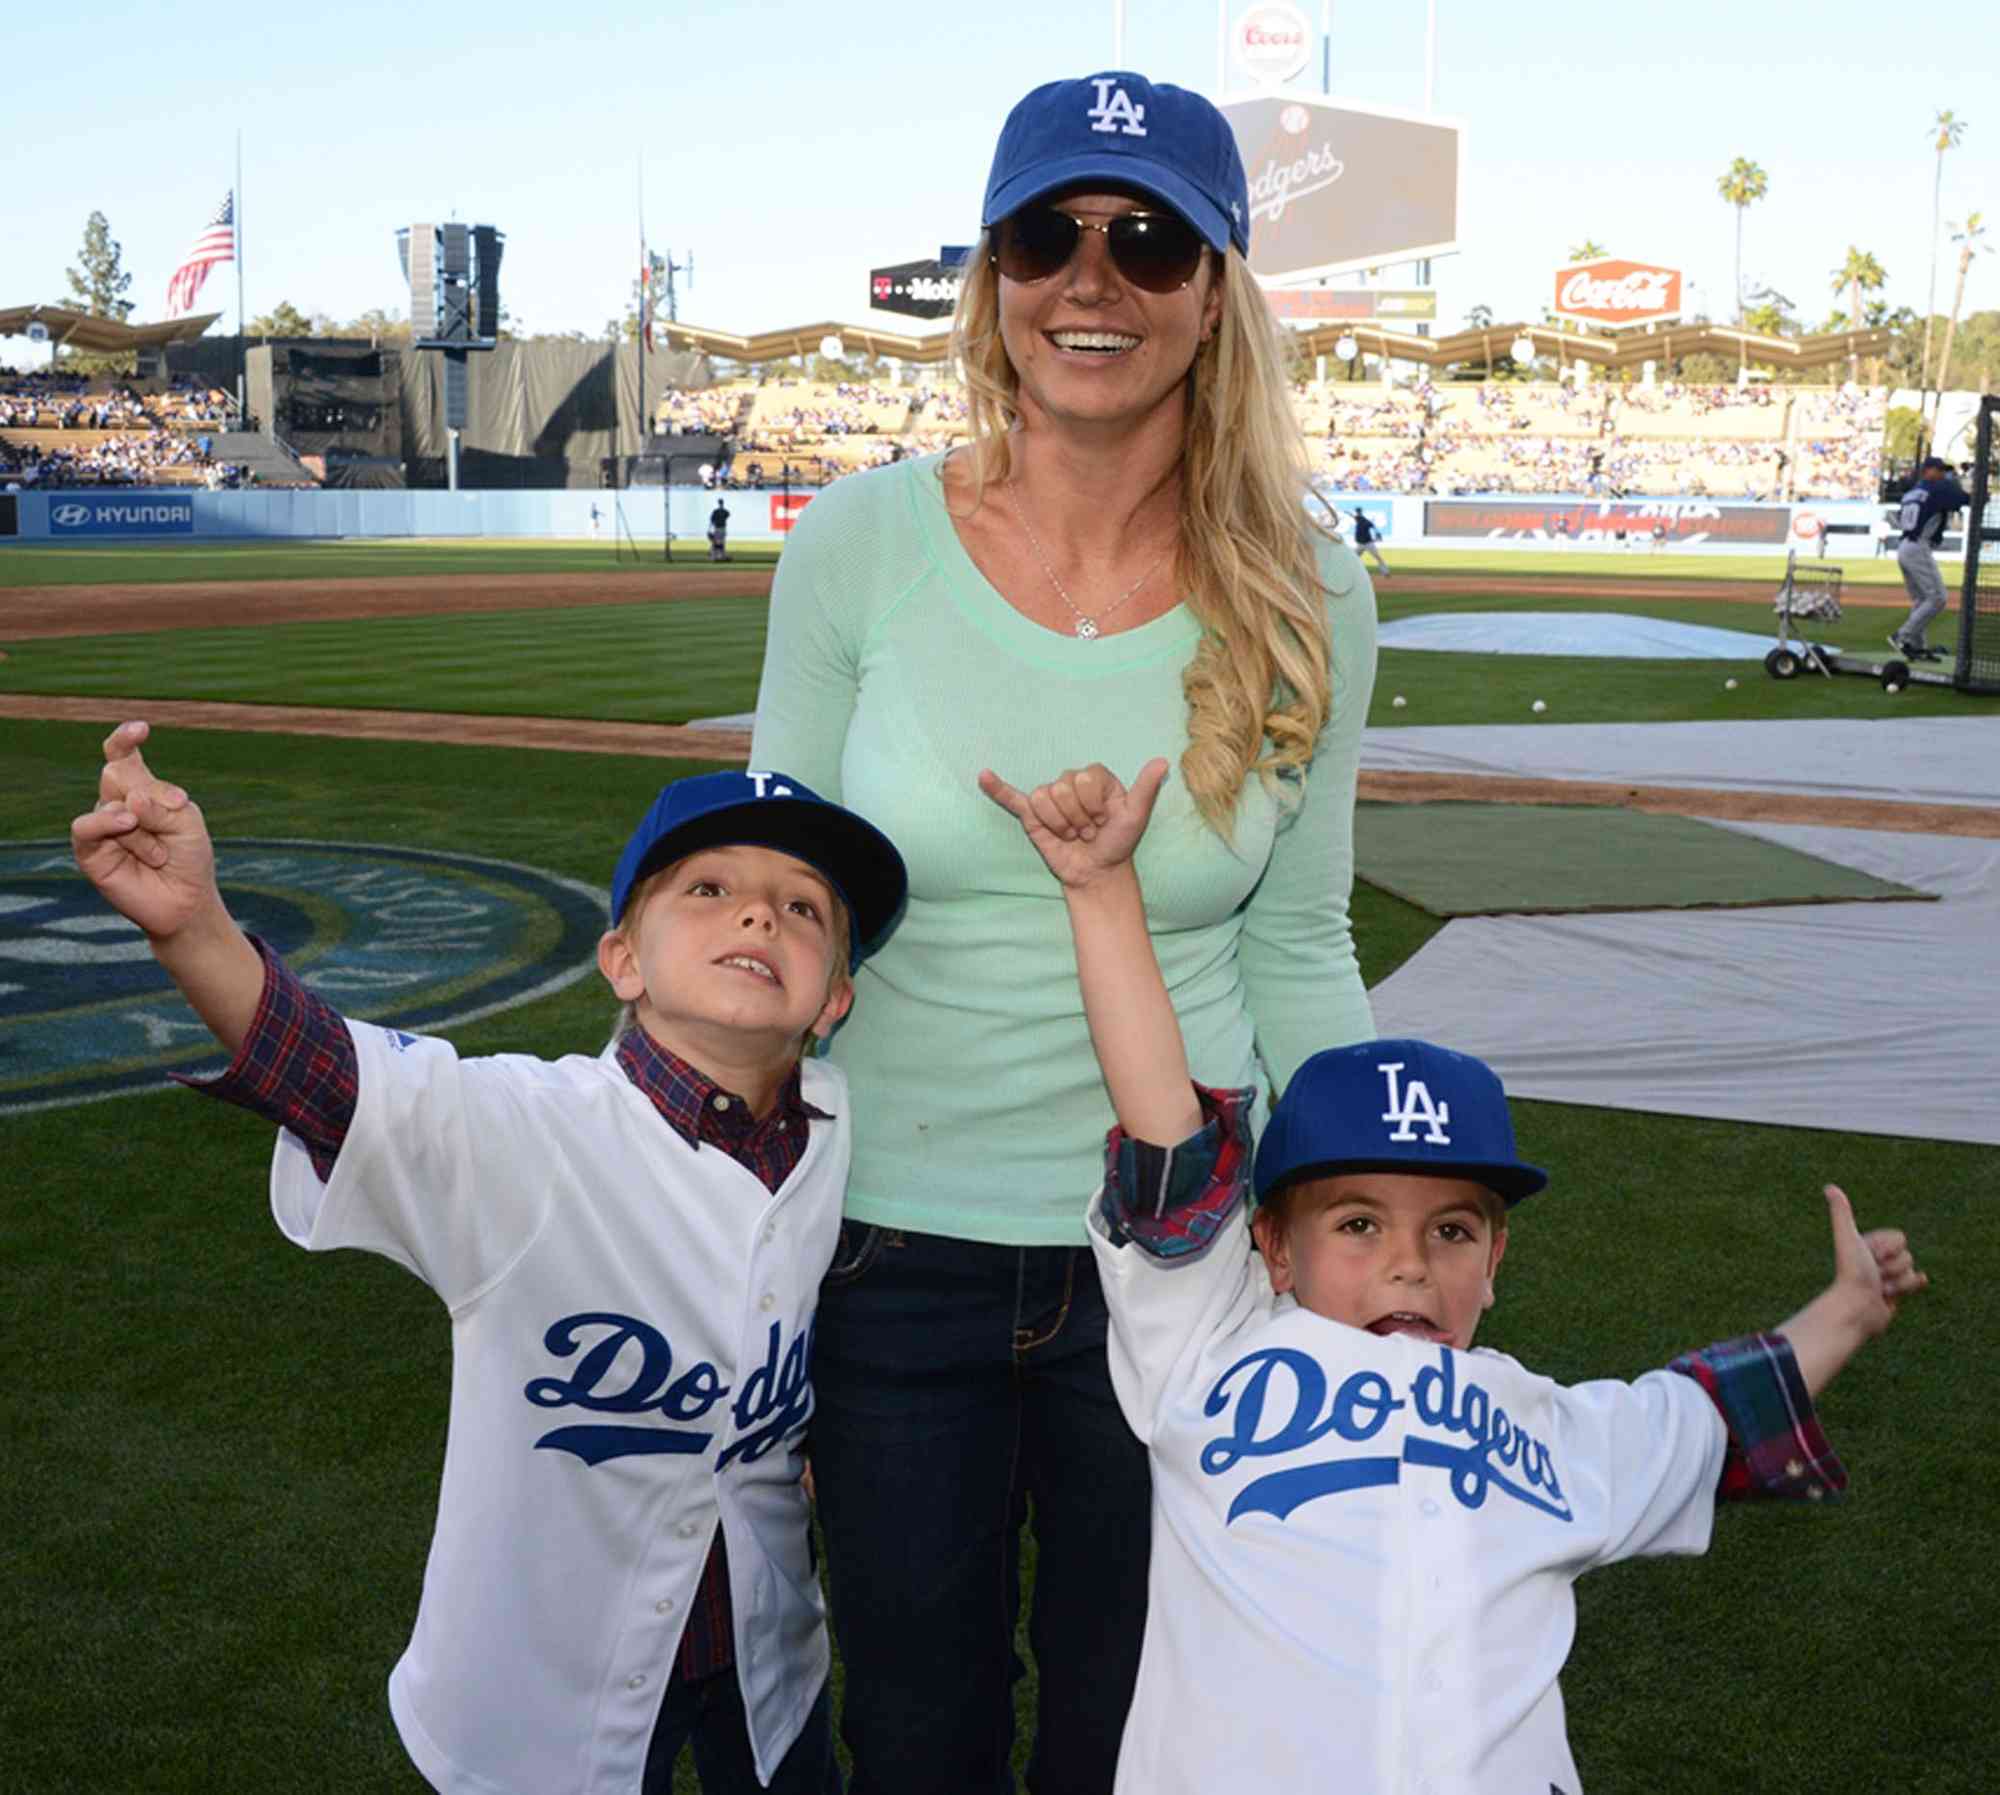 Britney Spears poses with sons Jayden James Federline (L) and Sean Preston Federline (R) during agame against the San Diego Padres at Dodger Stadium on April 17, 2013 in Los Angeles, California